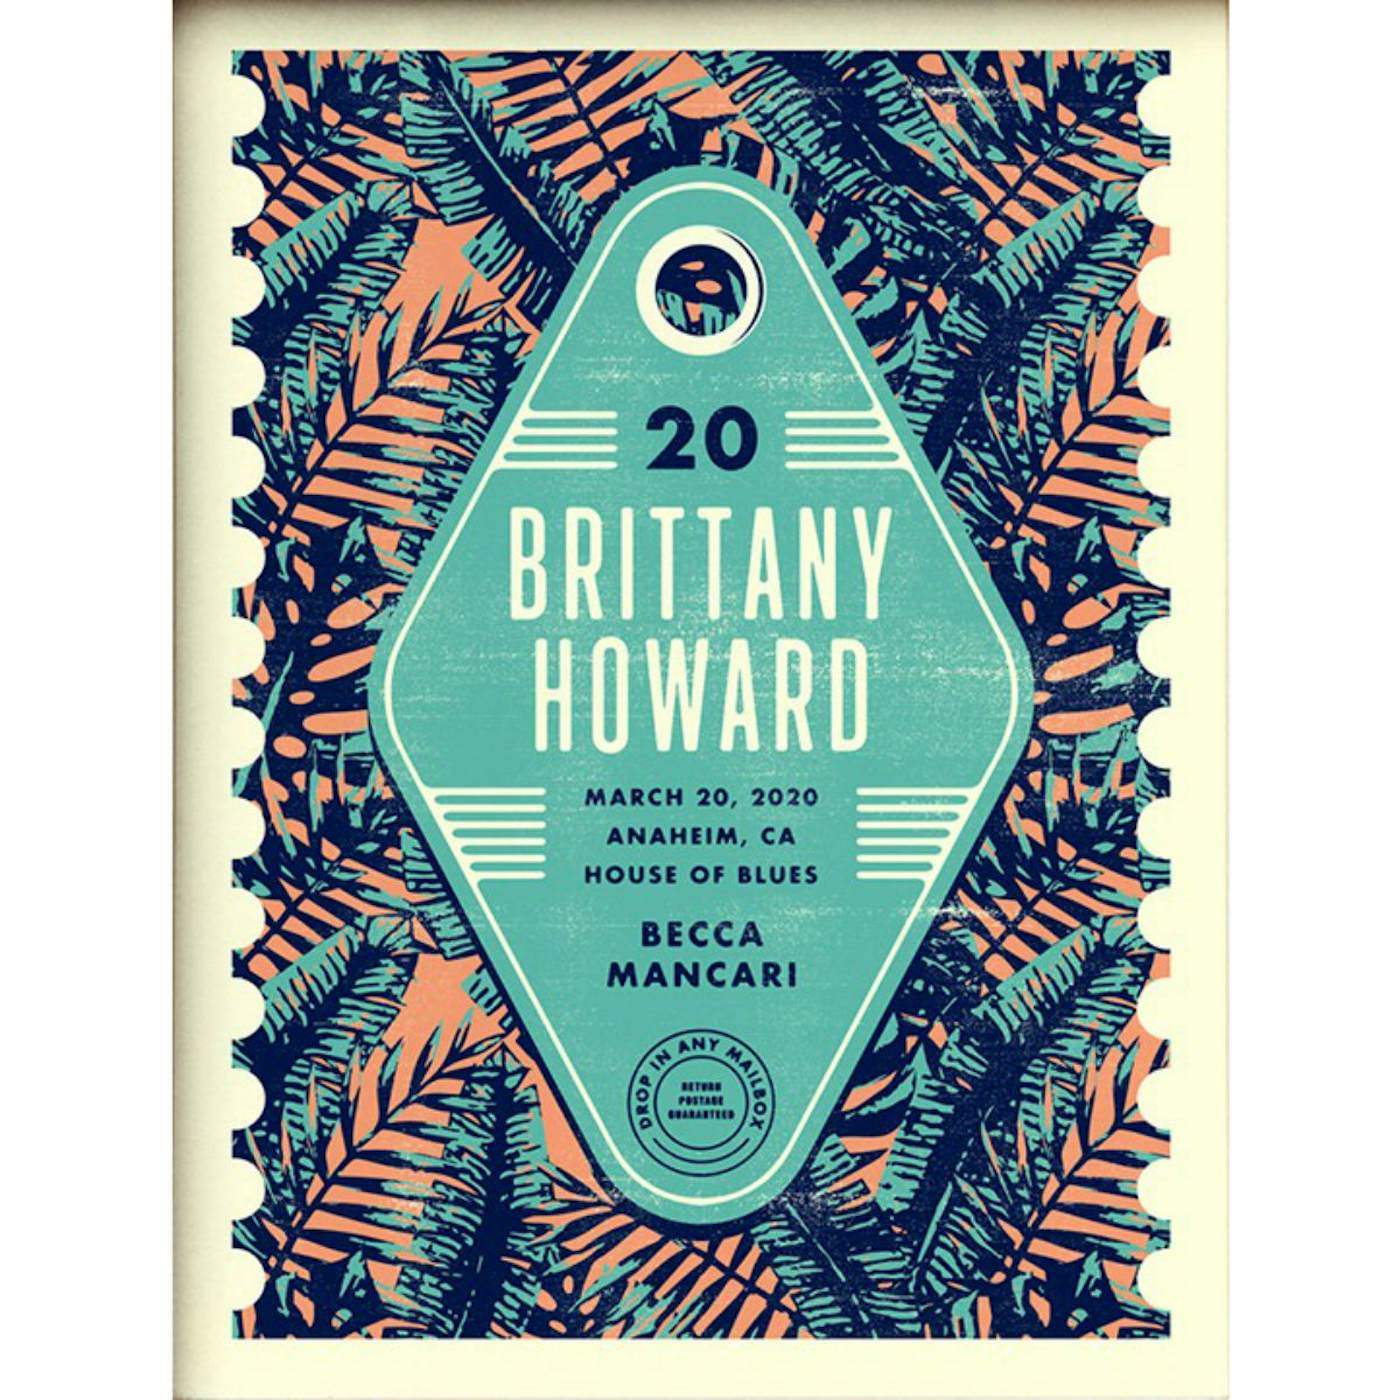 Brittany Howard Anaheim Event Poster